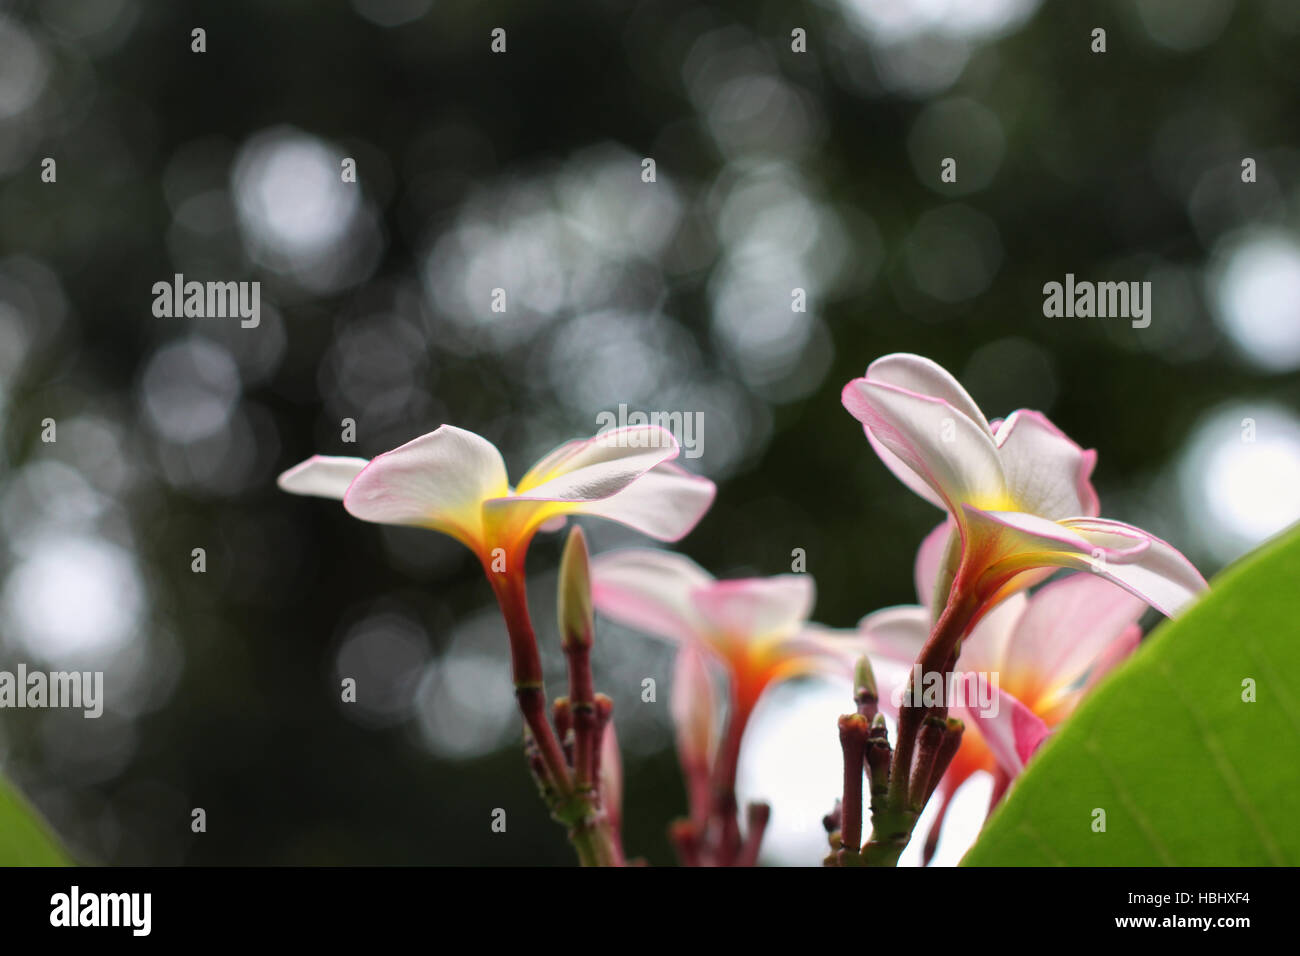 Closeup of a bunch of plumeria flowers Stock Photo